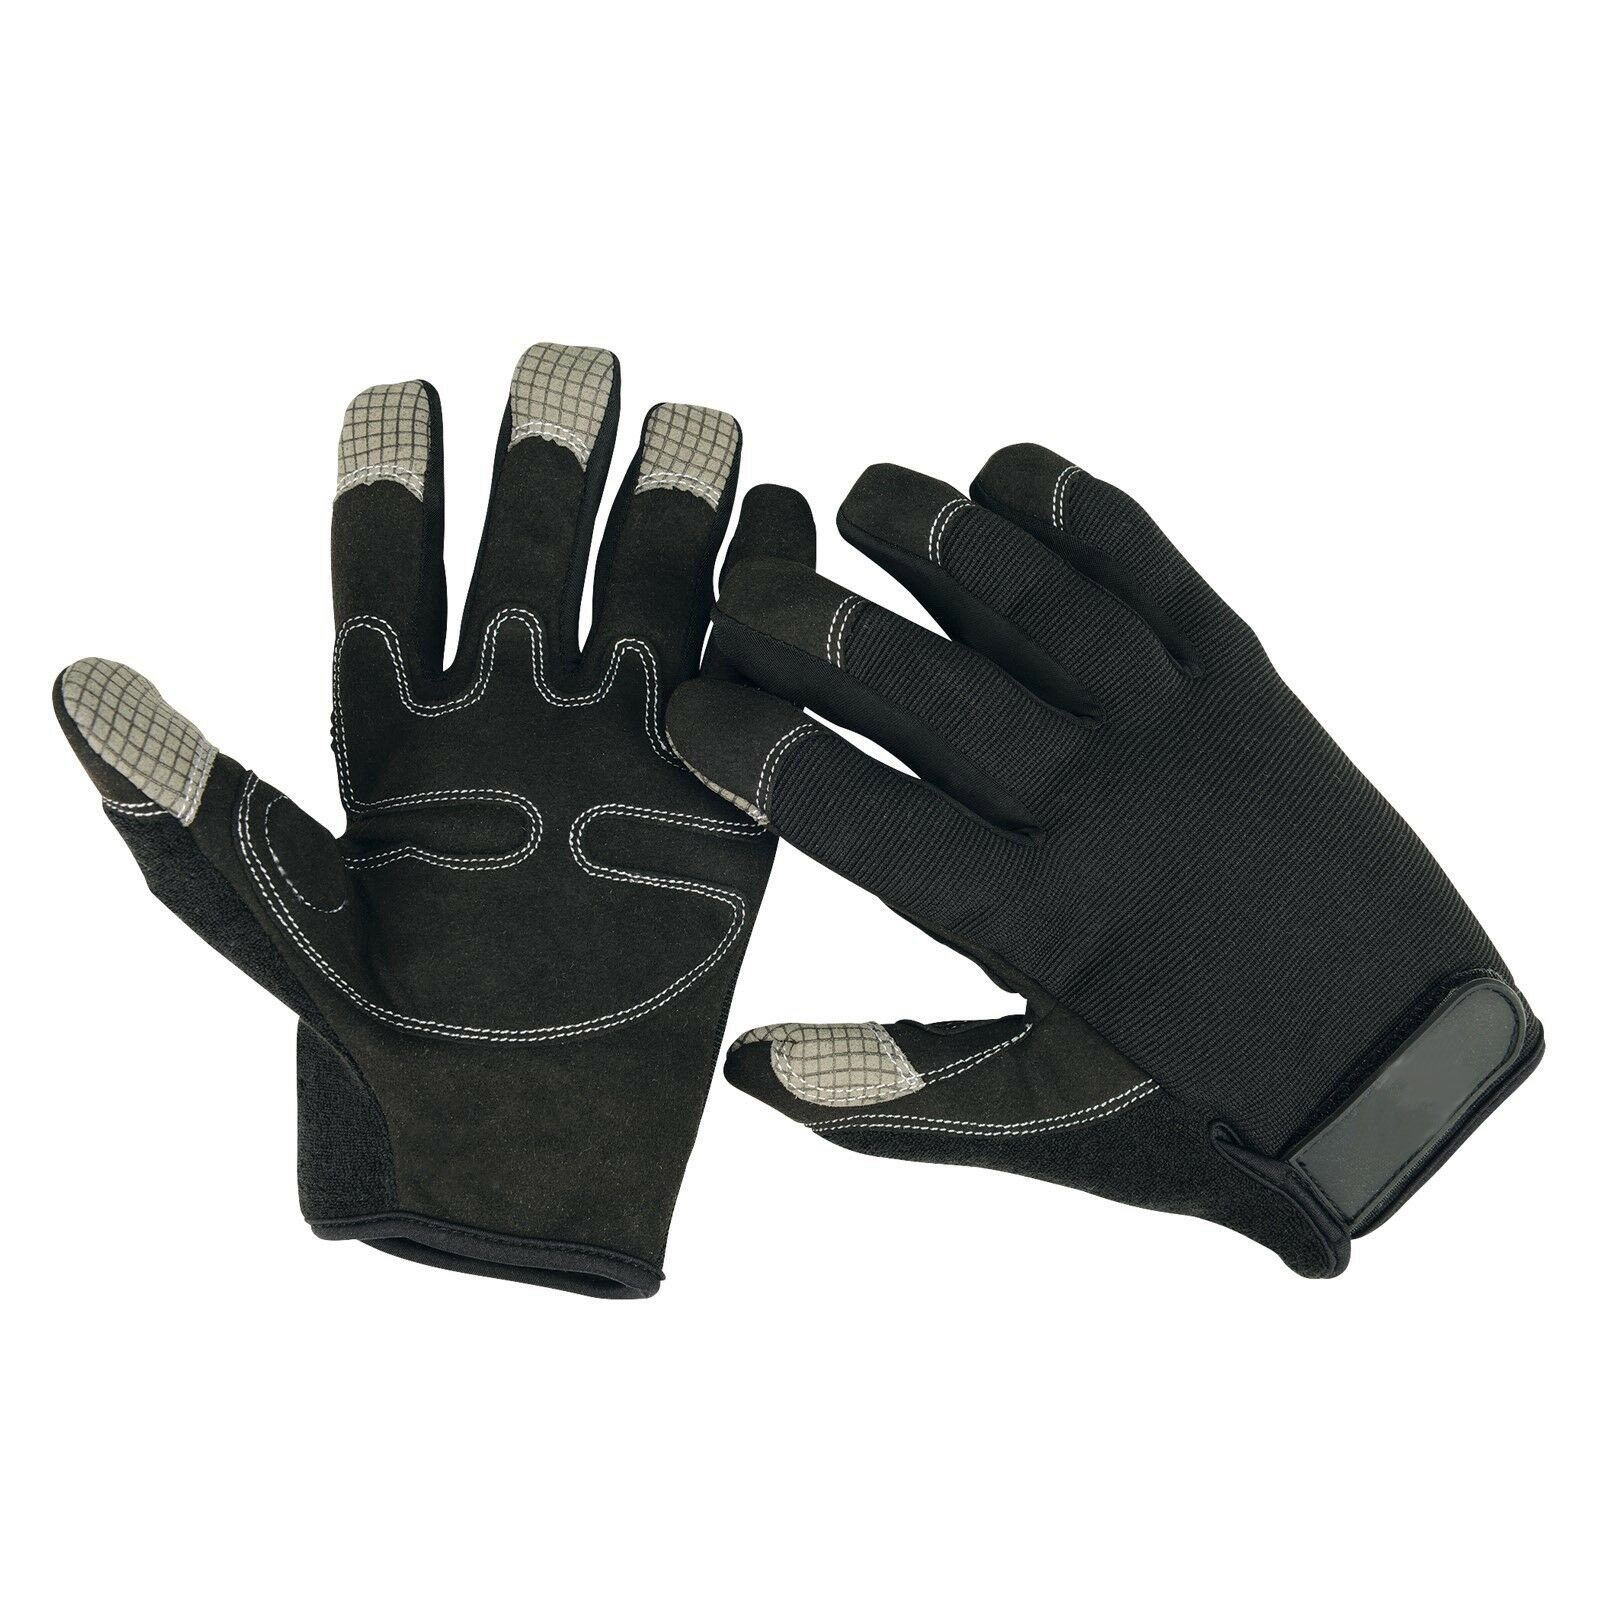 Breathable mechanic gloves synthetic leather strong grip and protection work gloves